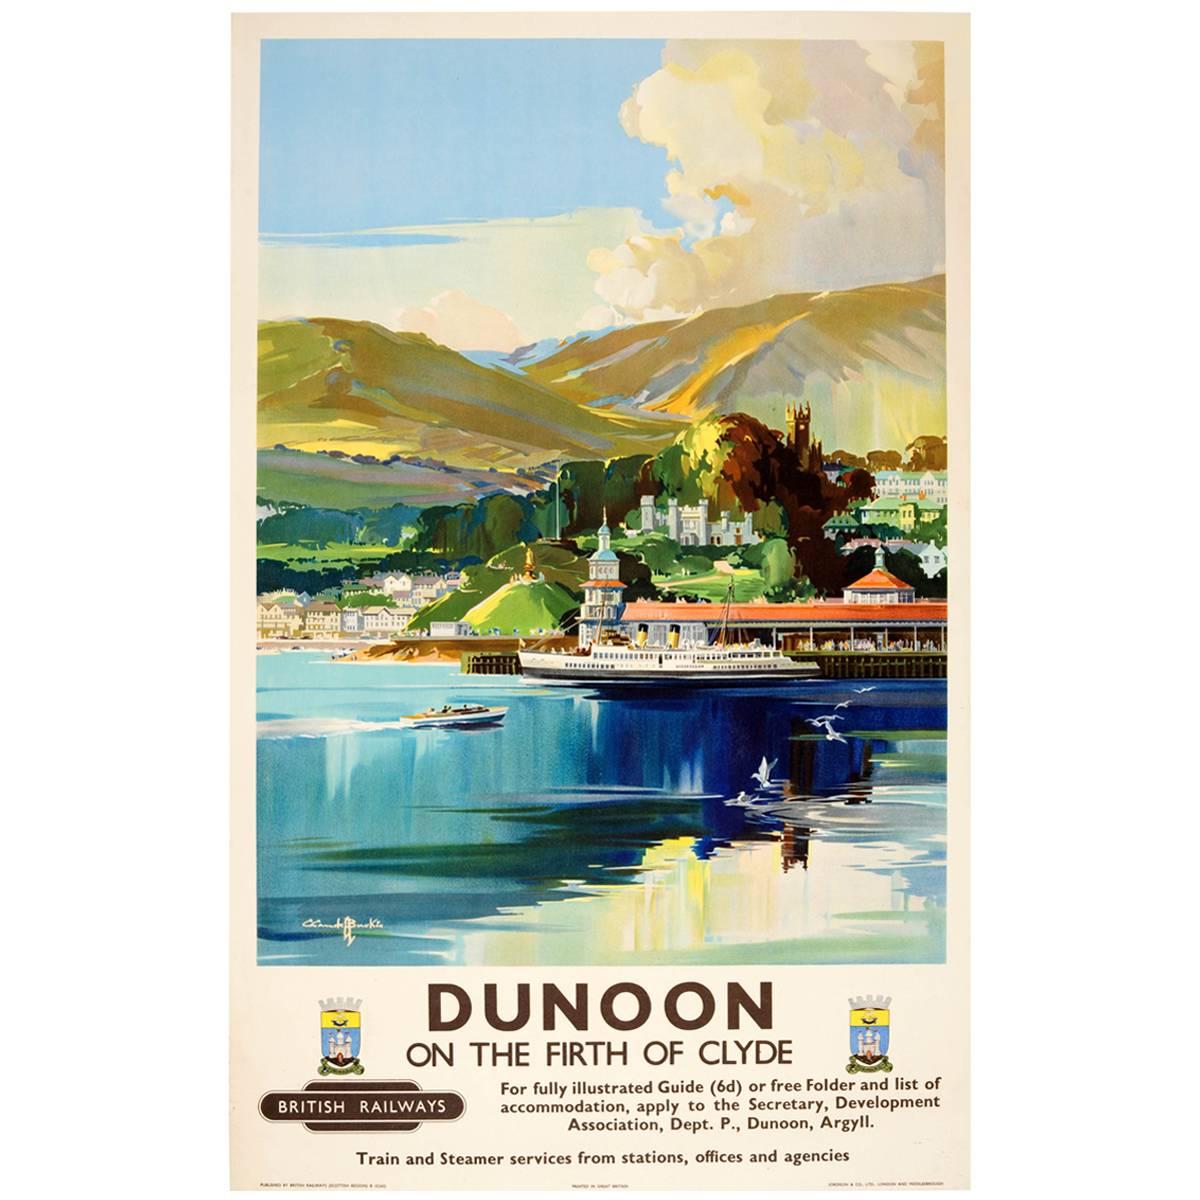 Original Vintage British Railways Poster - Dunoon On The Firth of Clyde Scotland